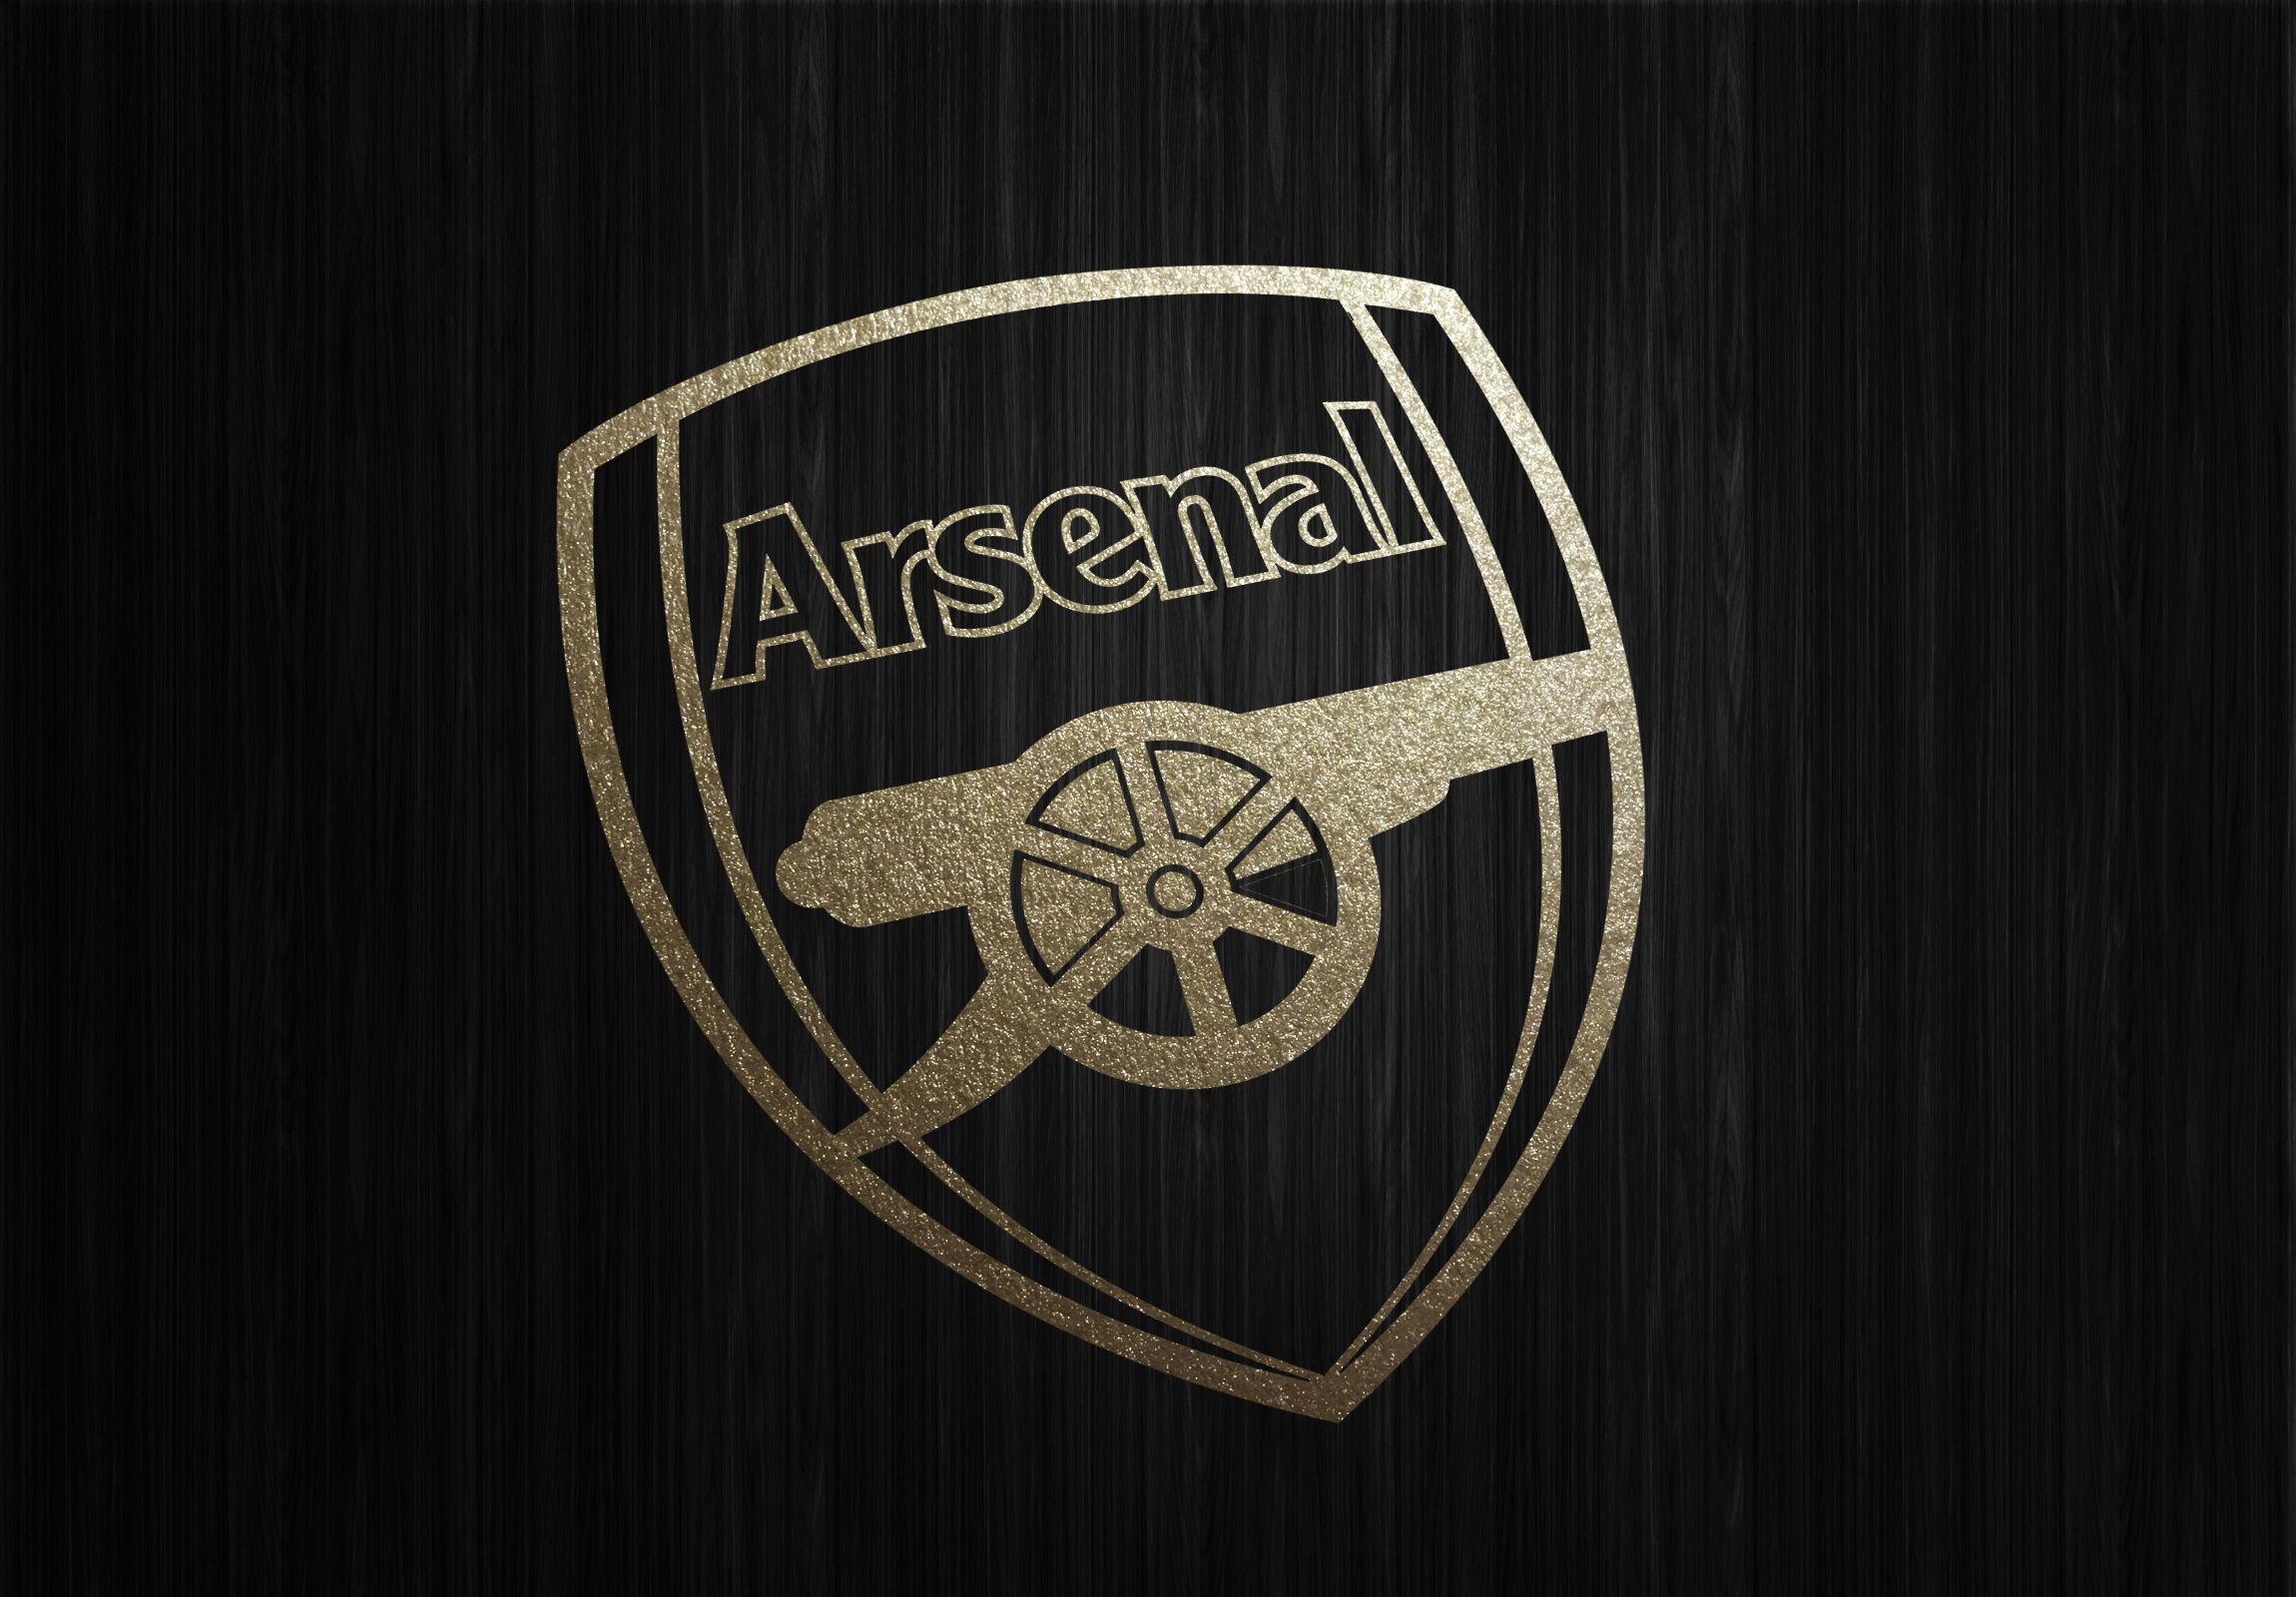 12 Download Arsenal Gold Wallpaper Hd free HD Wallpaper from the